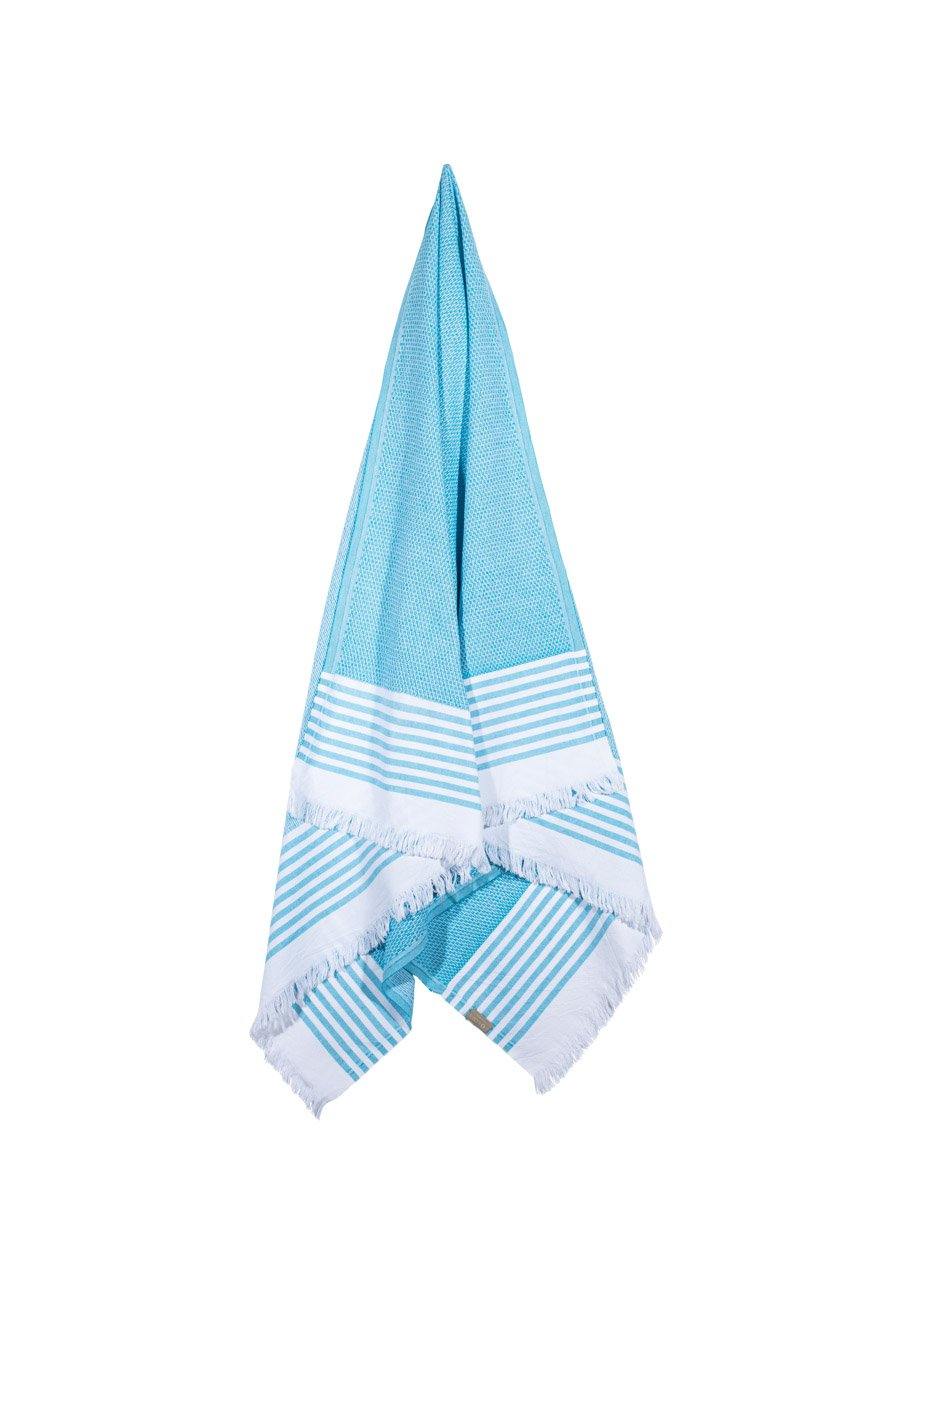 Coast - Turquoise and White Striped Hanging Towel